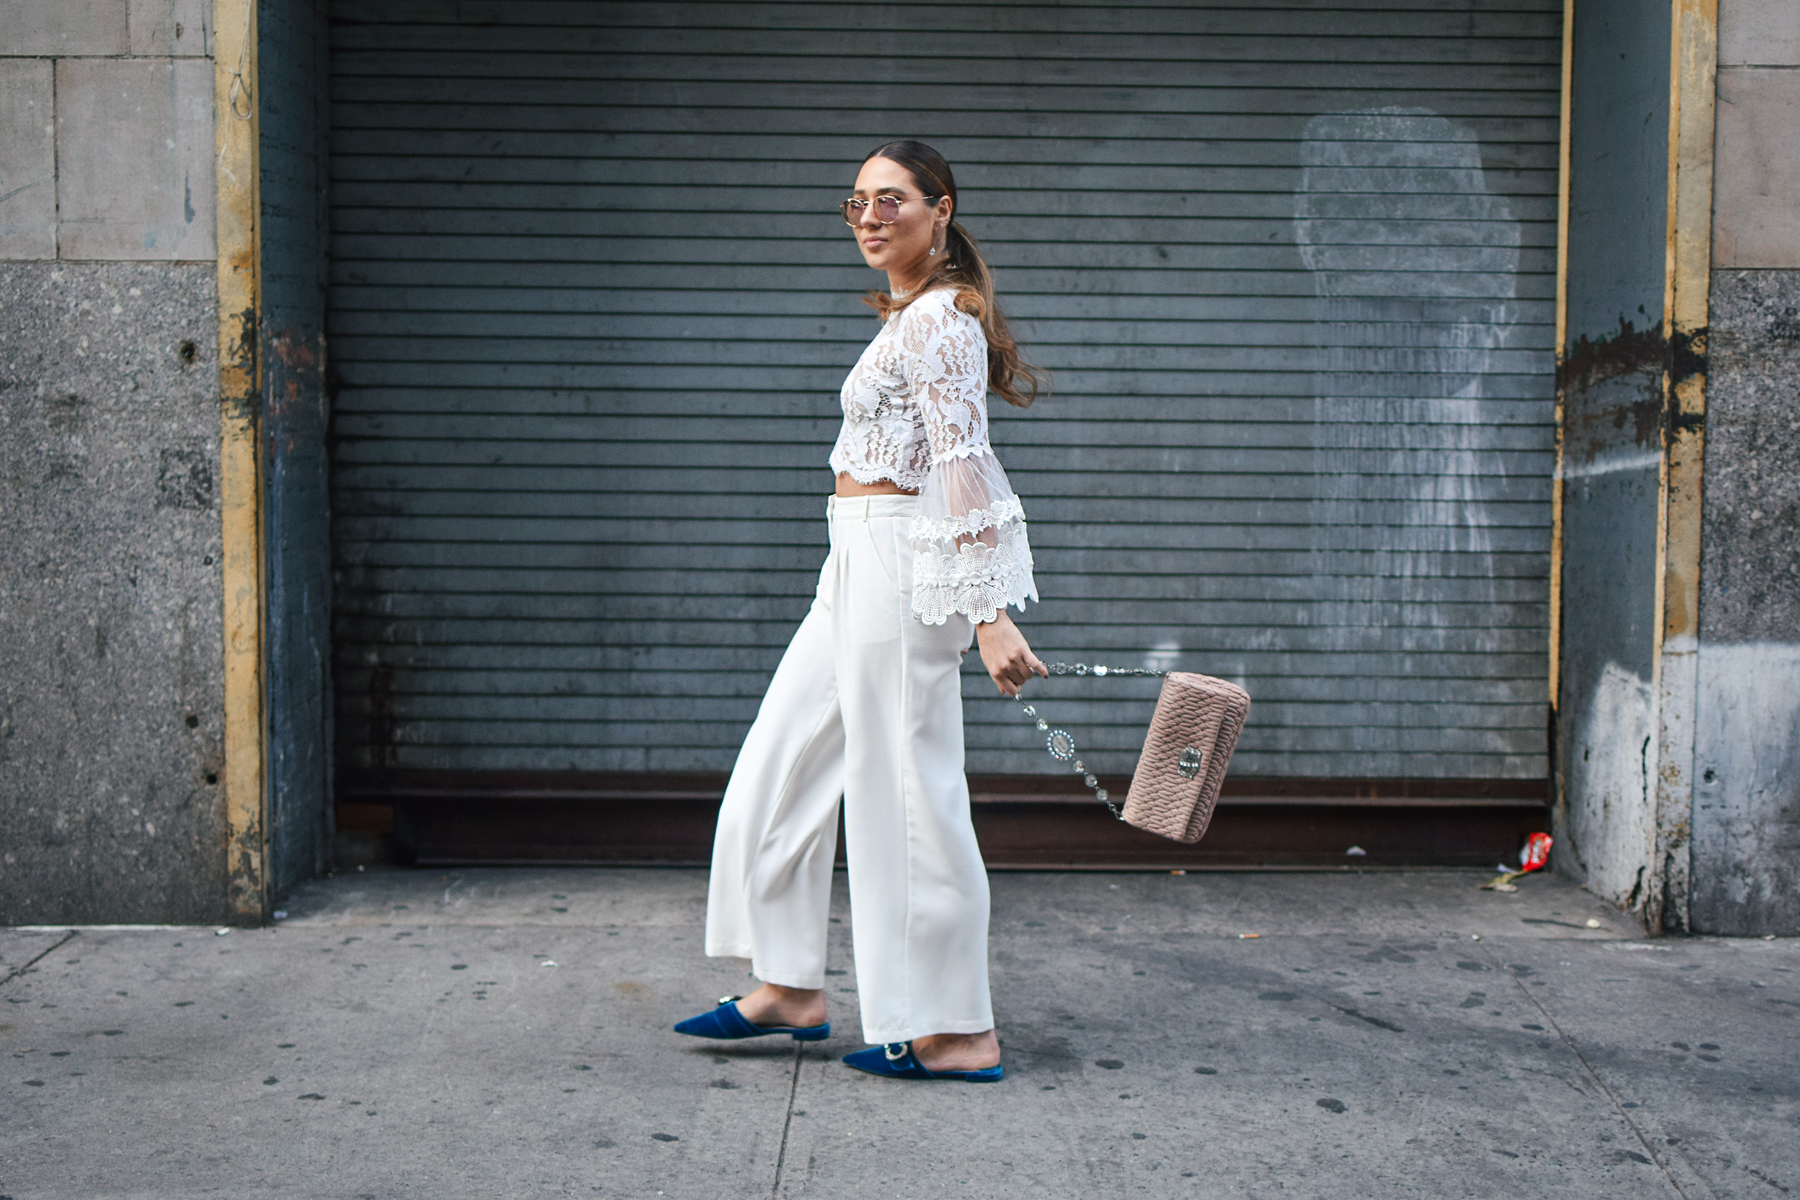 nyfw-streetstyle-outfit-lace-ruffle-statement-bell-sleeve-blouse-white-trousers-all-white-prada-royal-blue-slides-blush-accessories